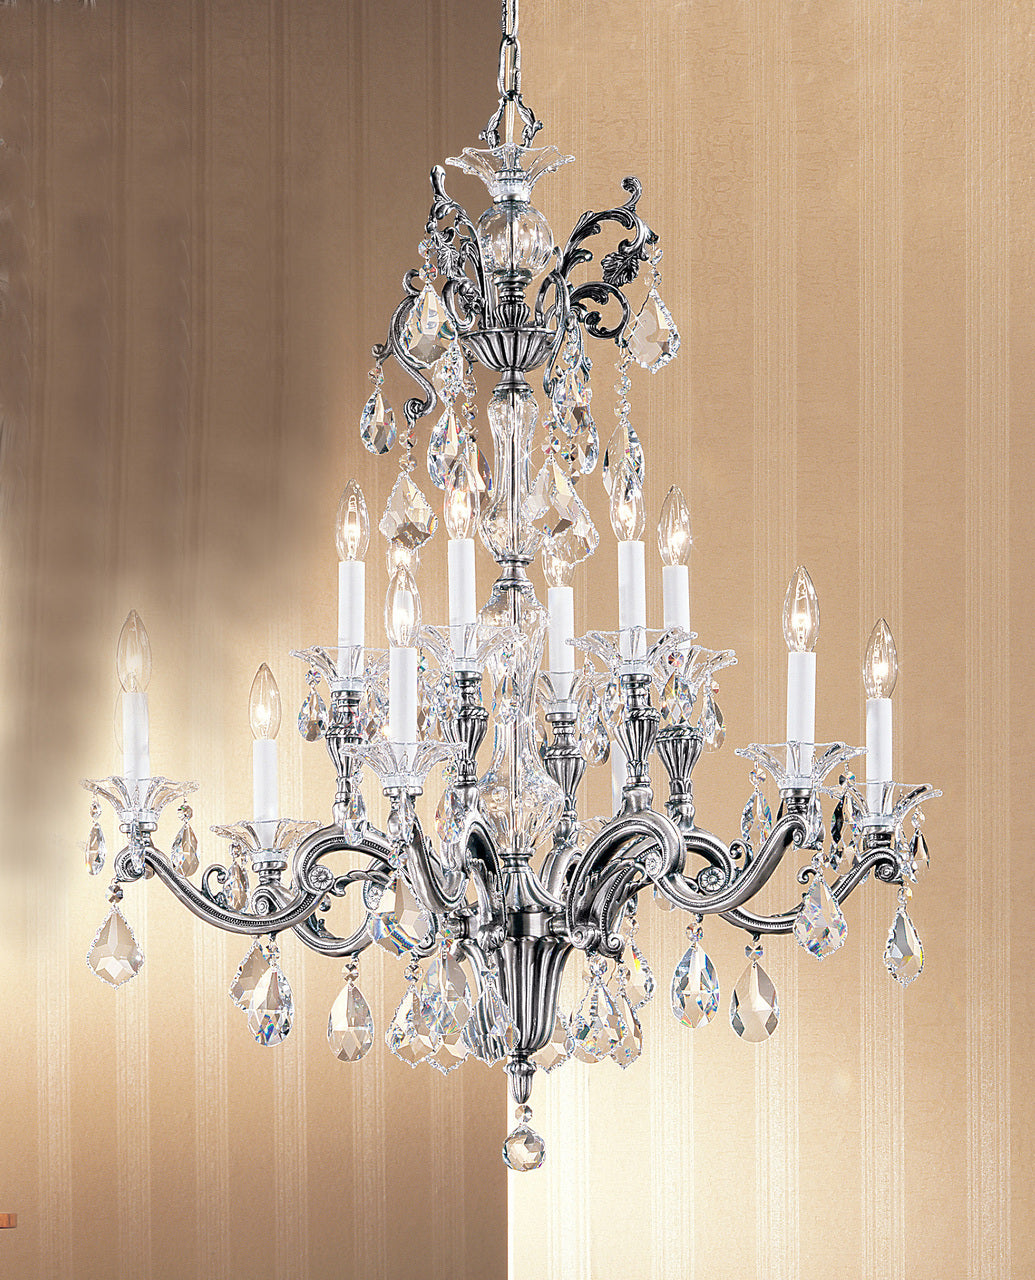 Classic Lighting 57112 MS S Via Firenze Crystal Chandelier in Millennium Silver (Imported from Spain)